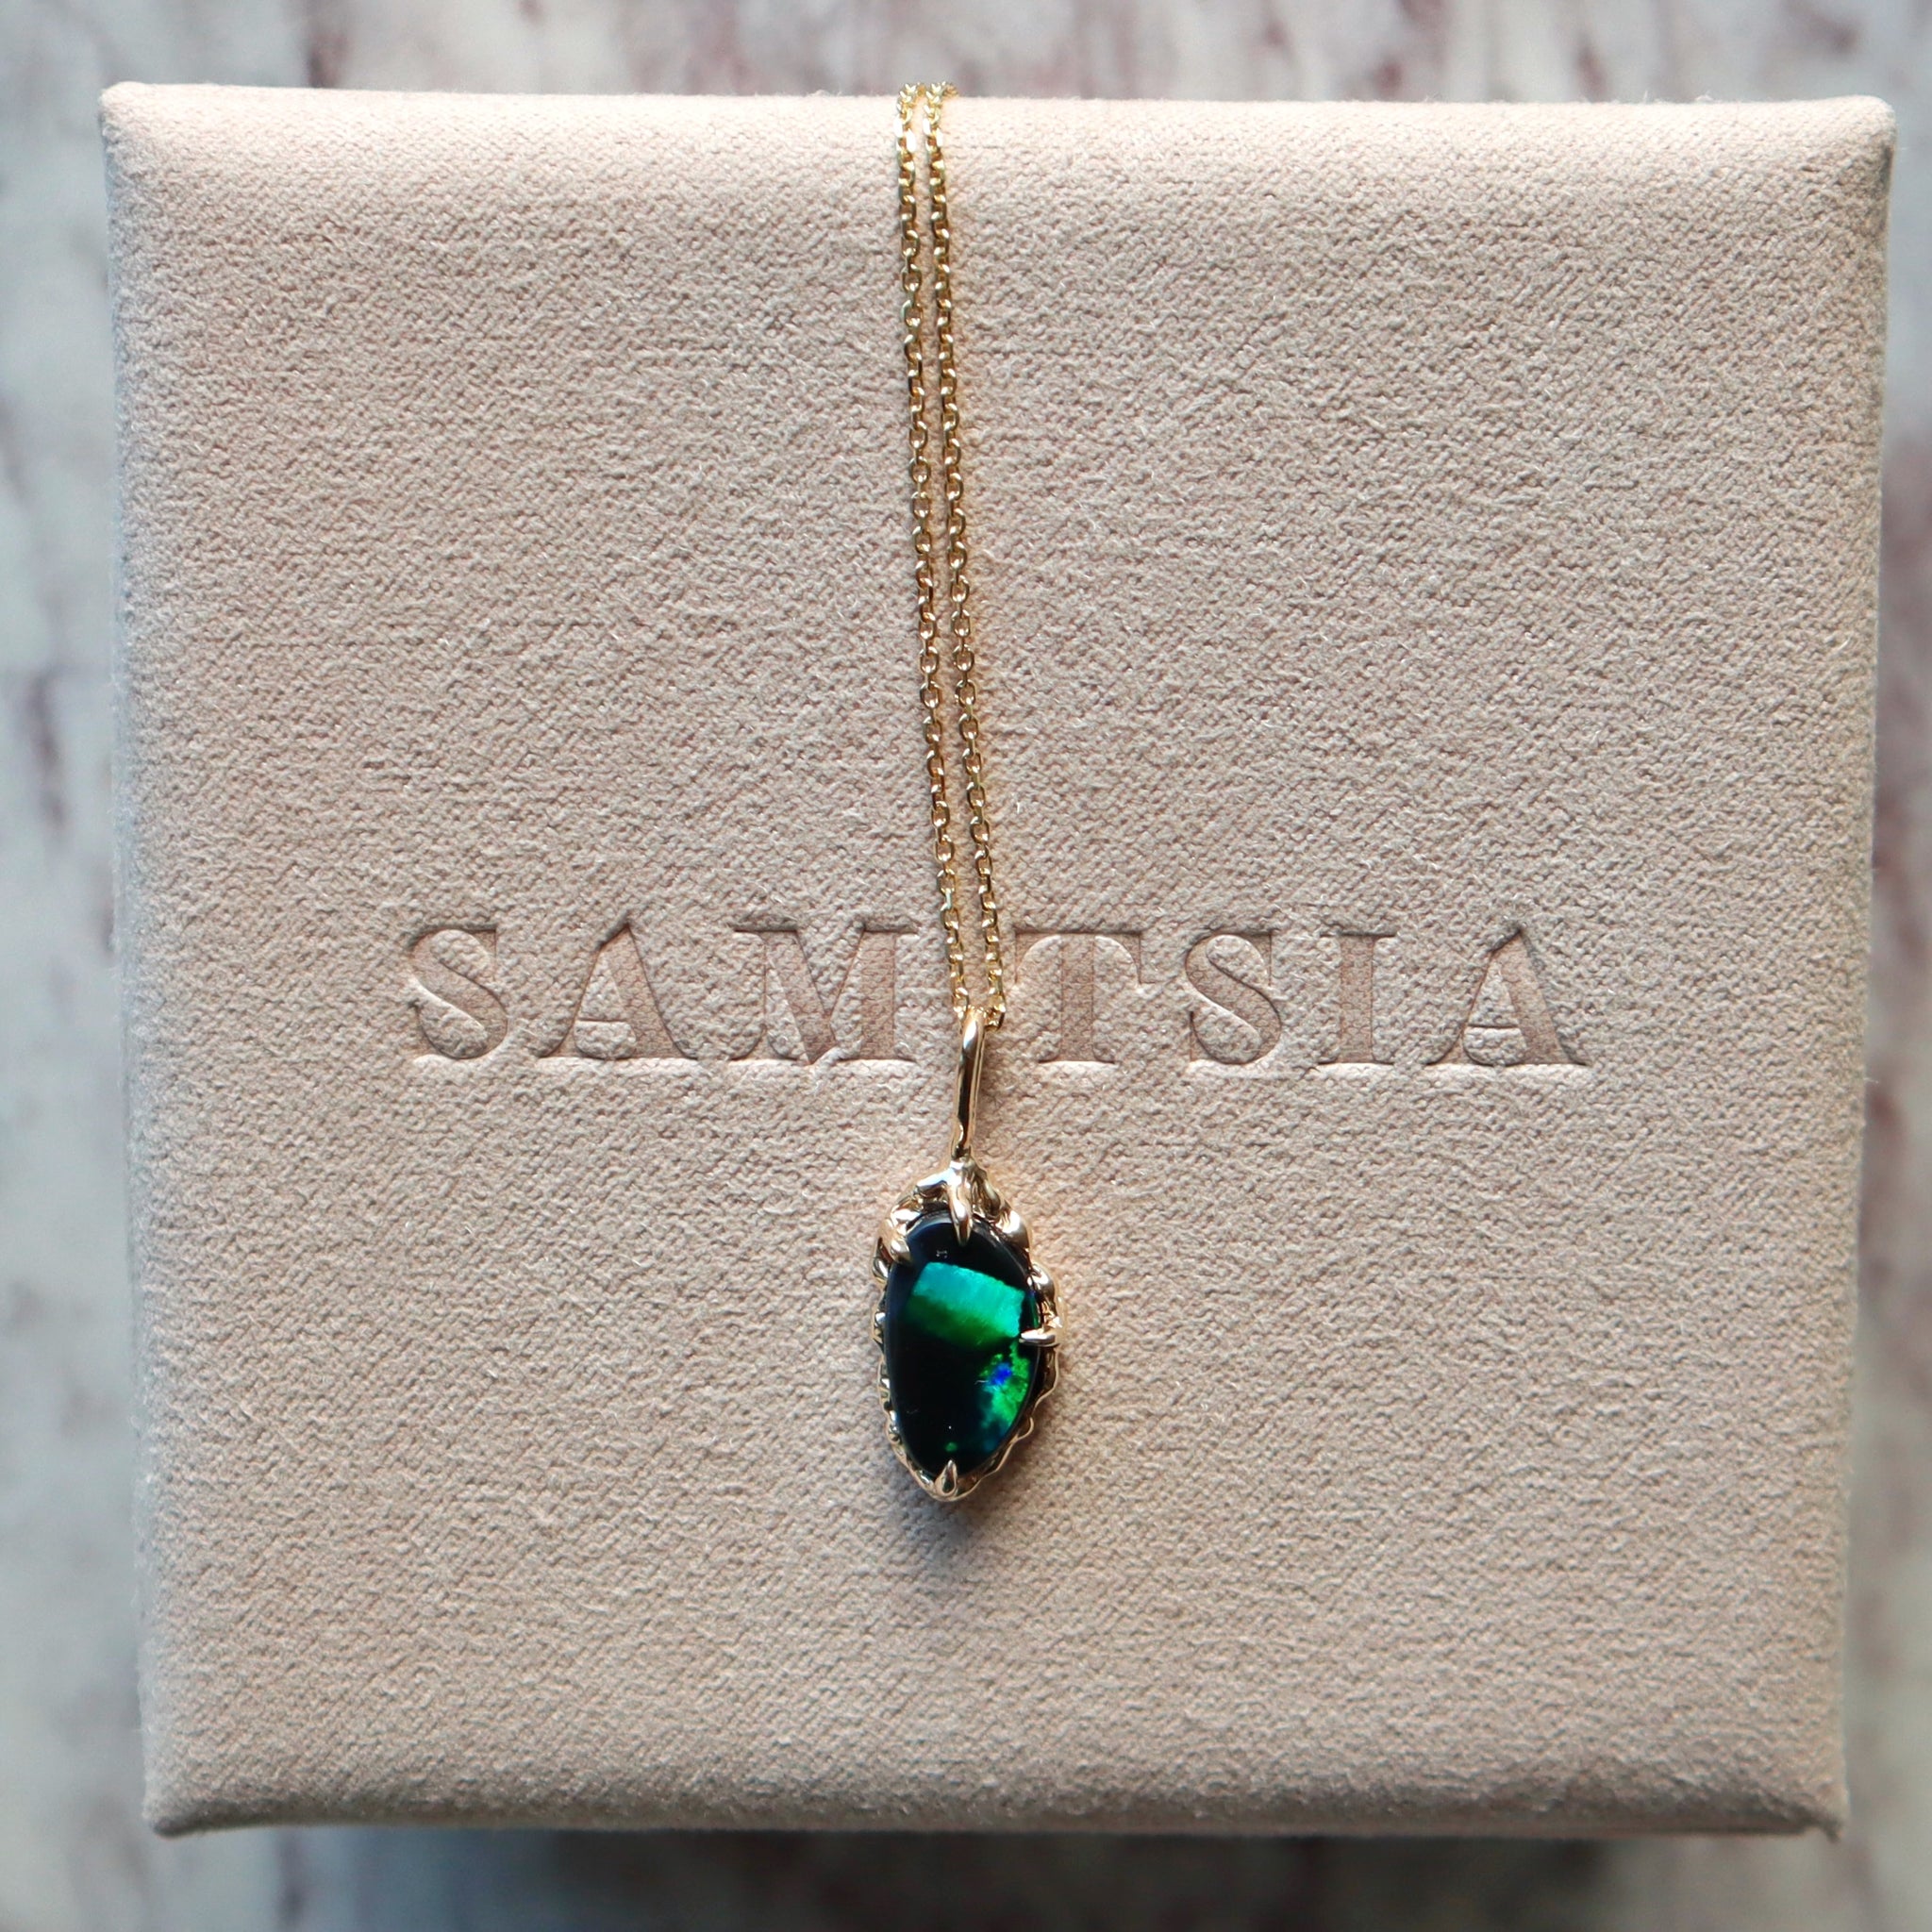 Black Opal Wing Necklace